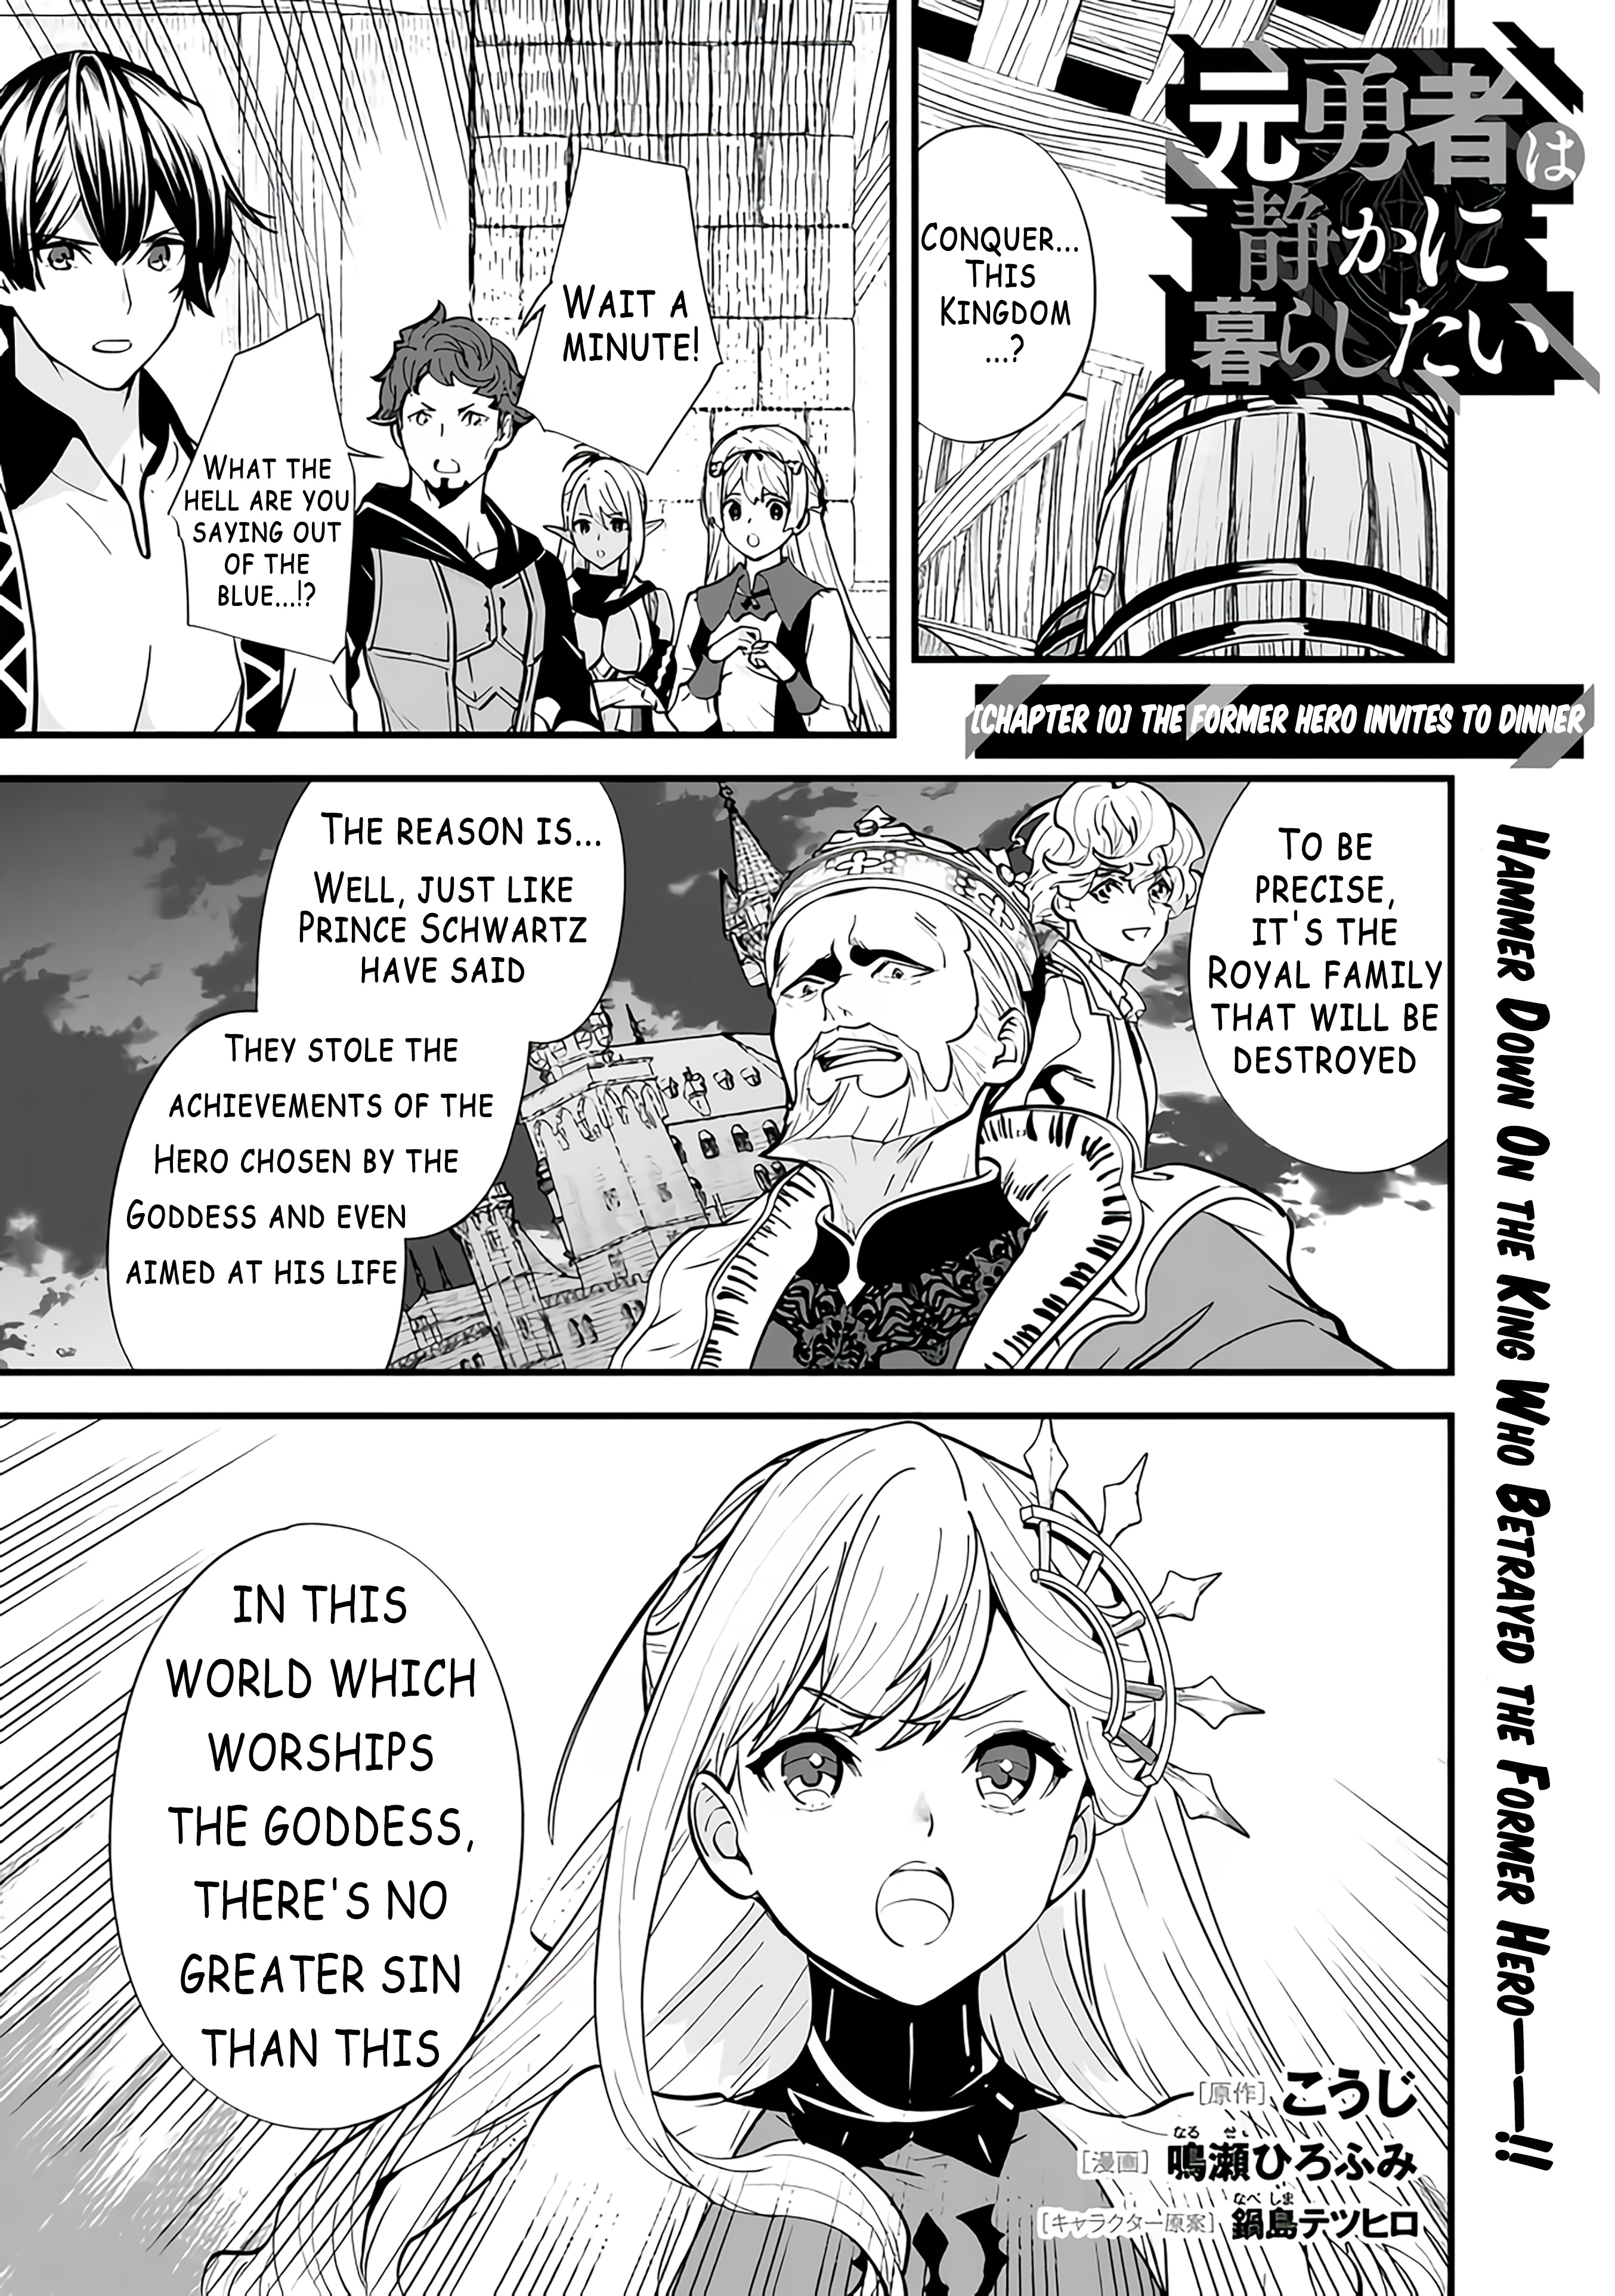 The Former Hero Wants To Live Peacefully - Page 1